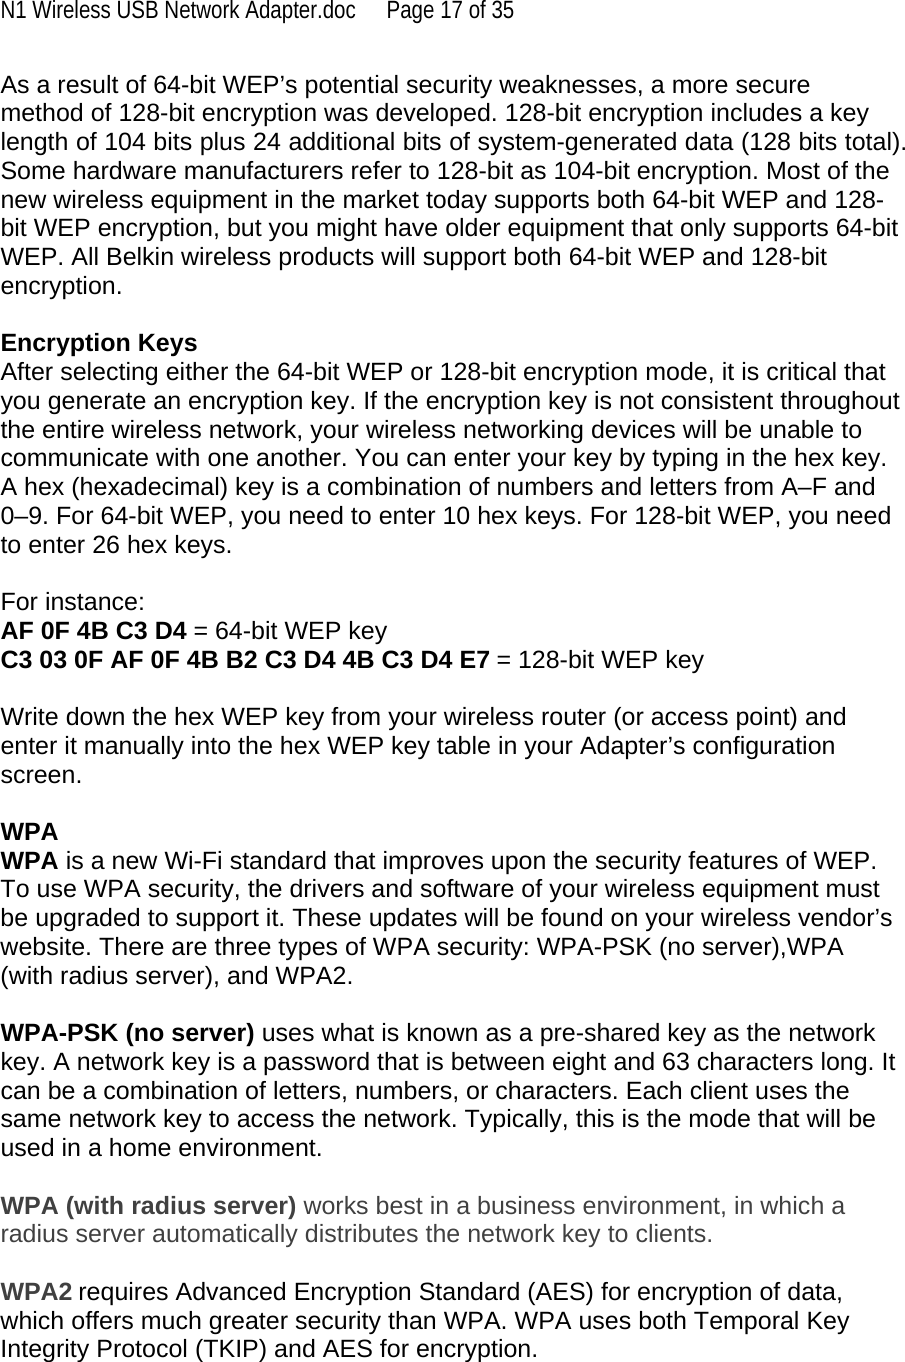 N1 Wireless USB Network Adapter.doc  Page 17 of 35 As a result of 64-bit WEP’s potential security weaknesses, a more secure method of 128-bit encryption was developed. 128-bit encryption includes a key length of 104 bits plus 24 additional bits of system-generated data (128 bits total). Some hardware manufacturers refer to 128-bit as 104-bit encryption. Most of the new wireless equipment in the market today supports both 64-bit WEP and 128-bit WEP encryption, but you might have older equipment that only supports 64-bit WEP. All Belkin wireless products will support both 64-bit WEP and 128-bit encryption.   Encryption Keys  After selecting either the 64-bit WEP or 128-bit encryption mode, it is critical that you generate an encryption key. If the encryption key is not consistent throughout the entire wireless network, your wireless networking devices will be unable to communicate with one another. You can enter your key by typing in the hex key. A hex (hexadecimal) key is a combination of numbers and letters from A–F and 0–9. For 64-bit WEP, you need to enter 10 hex keys. For 128-bit WEP, you need to enter 26 hex keys.   For instance:  AF 0F 4B C3 D4 = 64-bit WEP key  C3 03 0F AF 0F 4B B2 C3 D4 4B C3 D4 E7 = 128-bit WEP key   Write down the hex WEP key from your wireless router (or access point) and enter it manually into the hex WEP key table in your Adapter’s configuration screen.  WPA  WPA is a new Wi-Fi standard that improves upon the security features of WEP. To use WPA security, the drivers and software of your wireless equipment must be upgraded to support it. These updates will be found on your wireless vendor’s website. There are three types of WPA security: WPA-PSK (no server),WPA (with radius server), and WPA2.  WPA-PSK (no server) uses what is known as a pre-shared key as the network key. A network key is a password that is between eight and 63 characters long. It can be a combination of letters, numbers, or characters. Each client uses the same network key to access the network. Typically, this is the mode that will be used in a home environment.   WPA (with radius server) works best in a business environment, in which a radius server automatically distributes the network key to clients.   WPA2 requires Advanced Encryption Standard (AES) for encryption of data, which offers much greater security than WPA. WPA uses both Temporal Key Integrity Protocol (TKIP) and AES for encryption.  